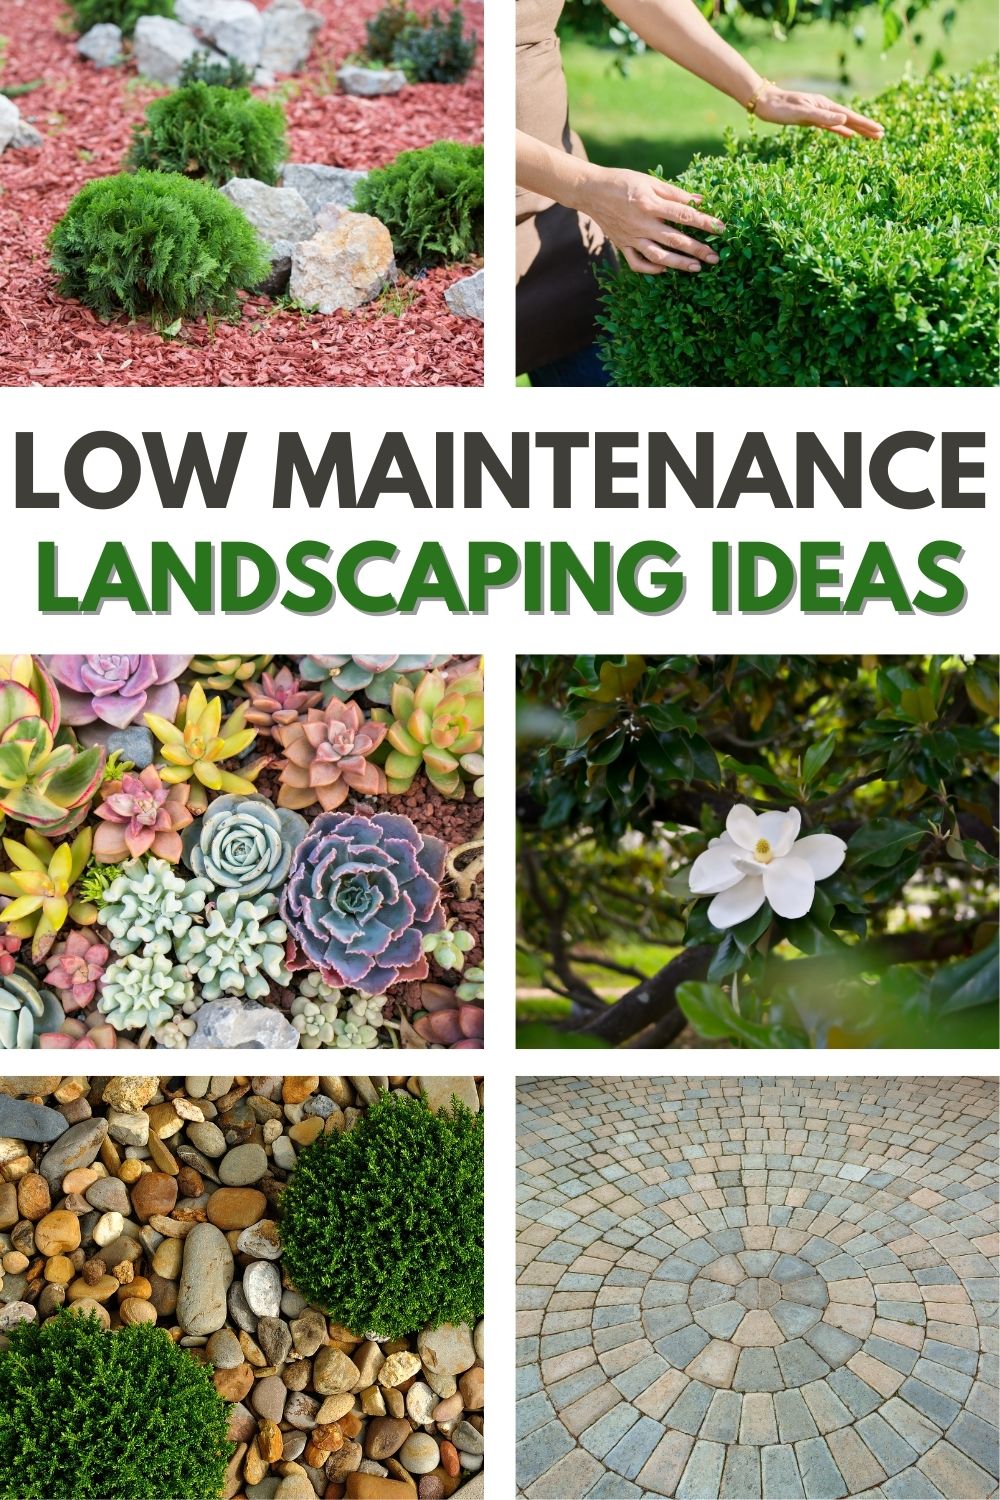 Several great landscaping ideas that require little to no upkeep. High on curb appeal, low on maintenance. #landscaping #decorating #lowmaintenance via @wondermomwannab